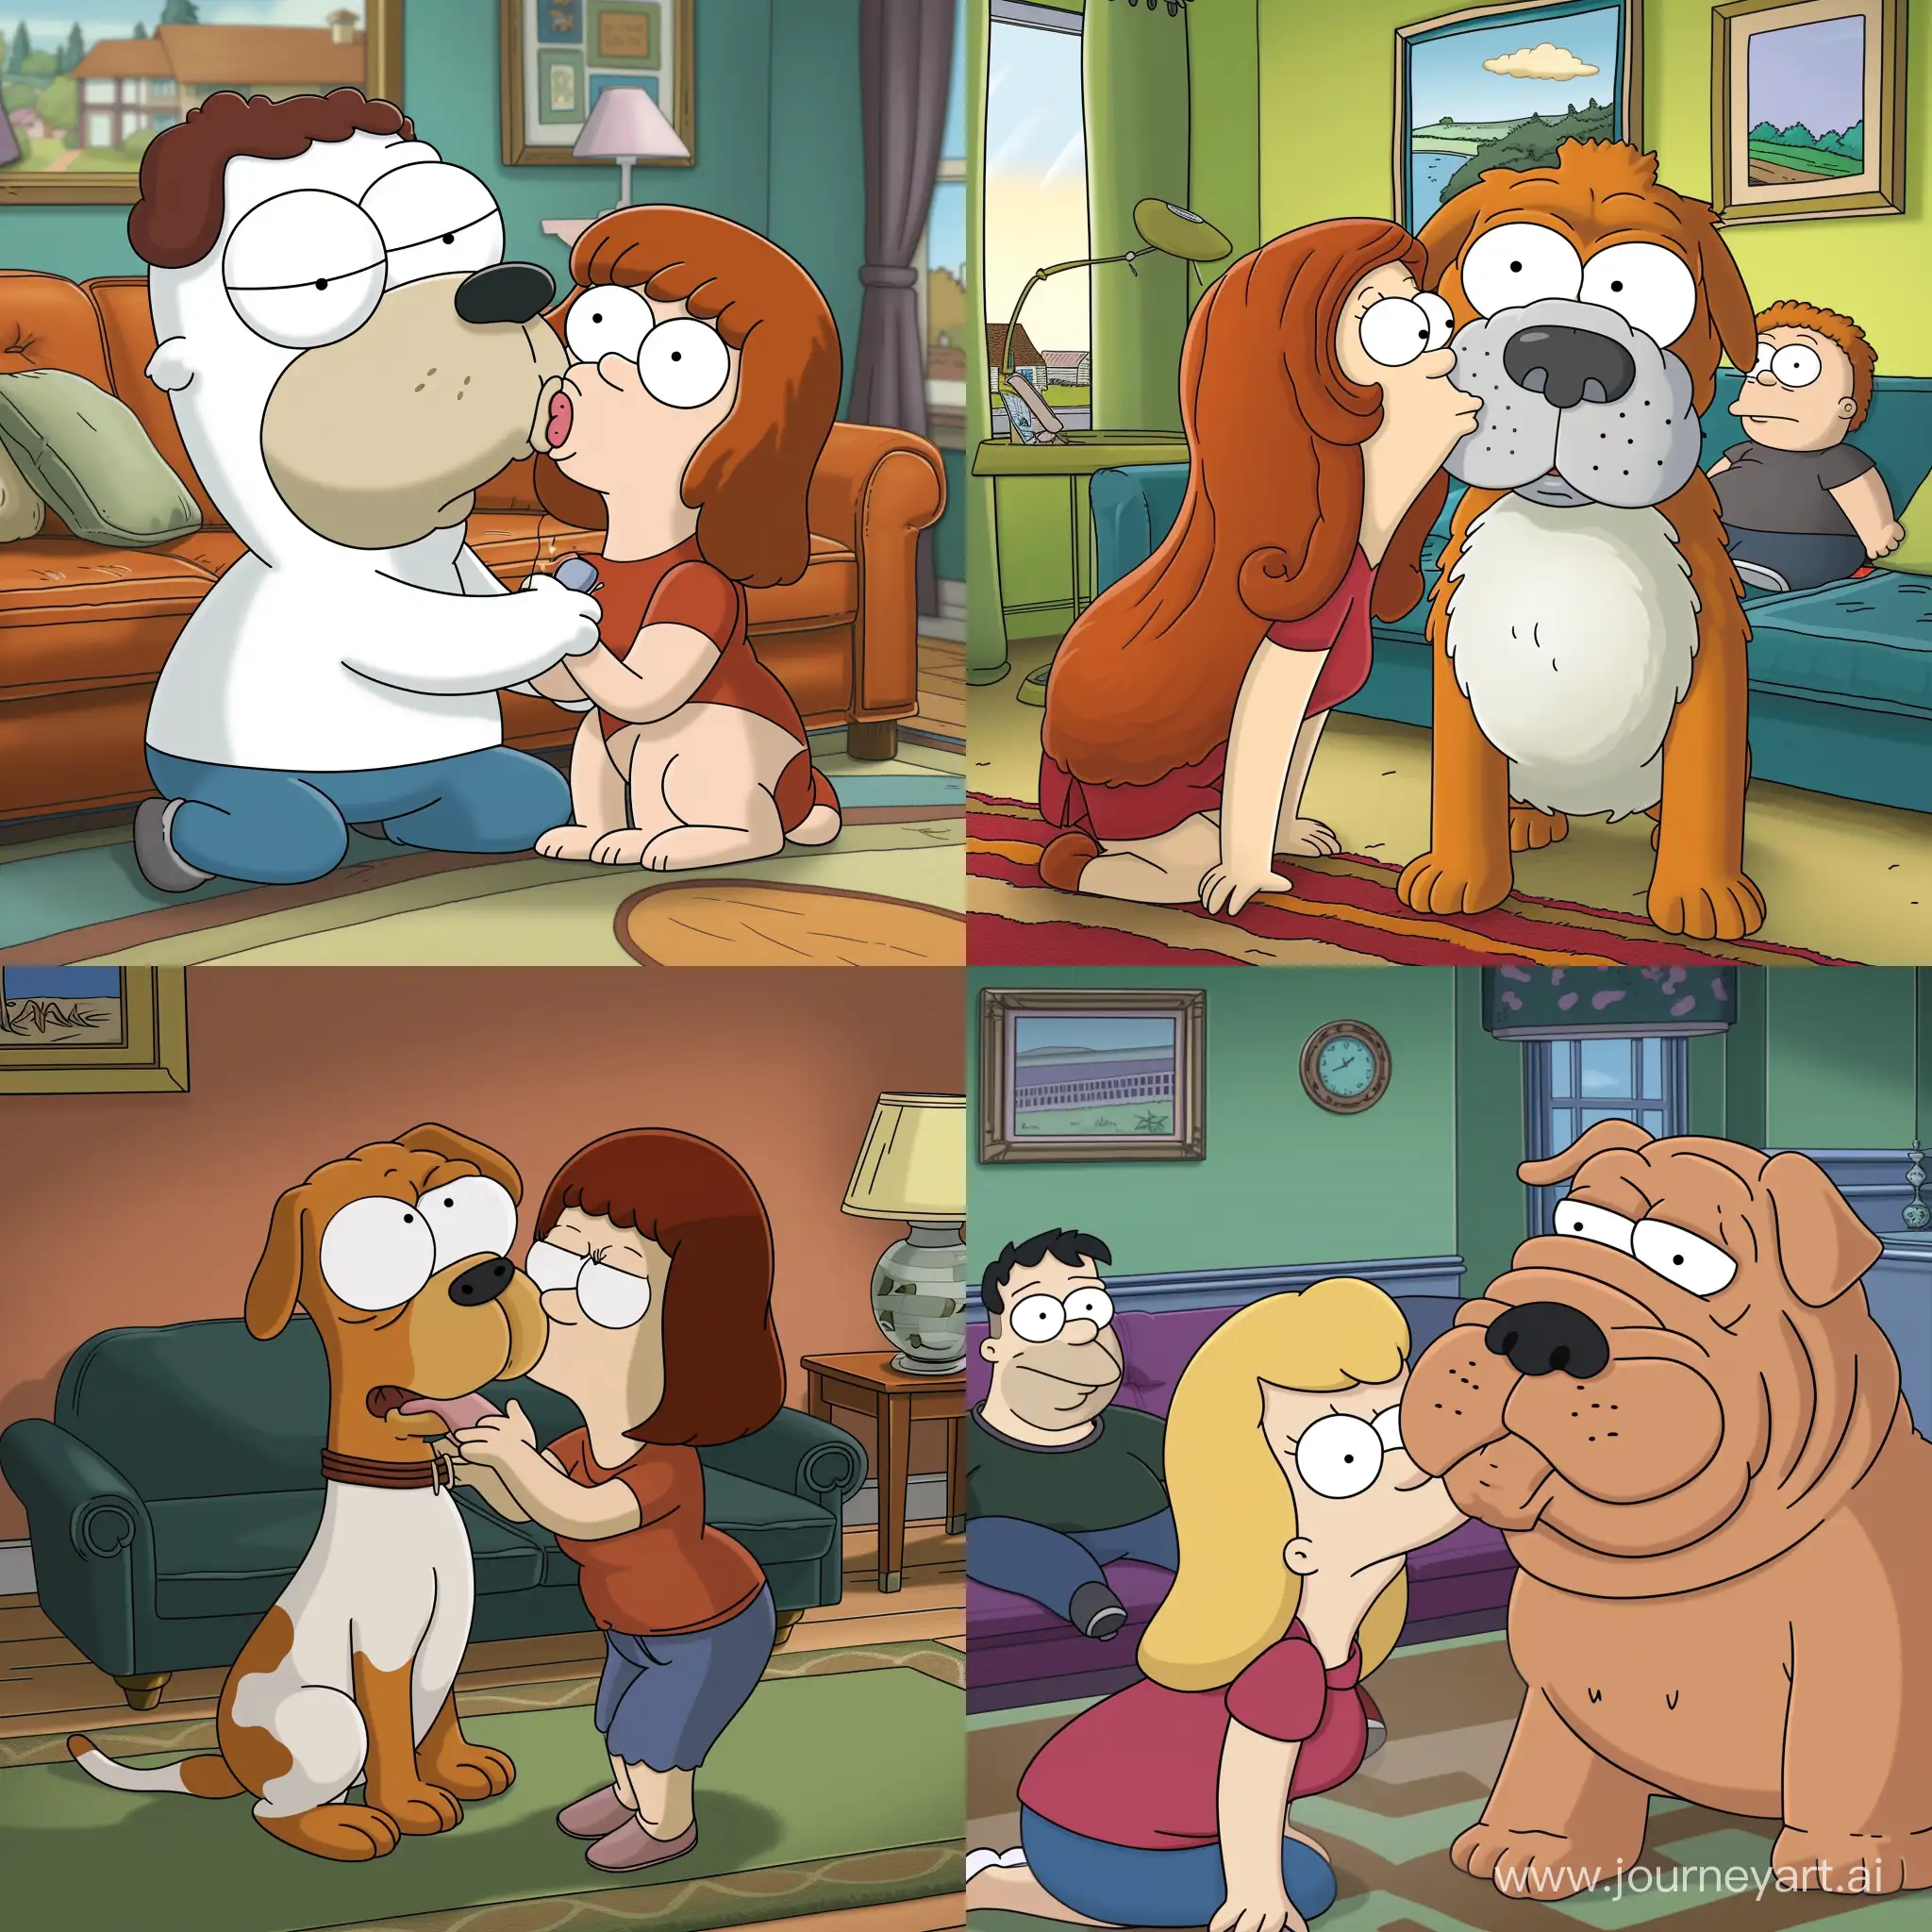 Mortdogs-Tender-Moment-with-Lois-Griffin-in-Family-Guy-Episode